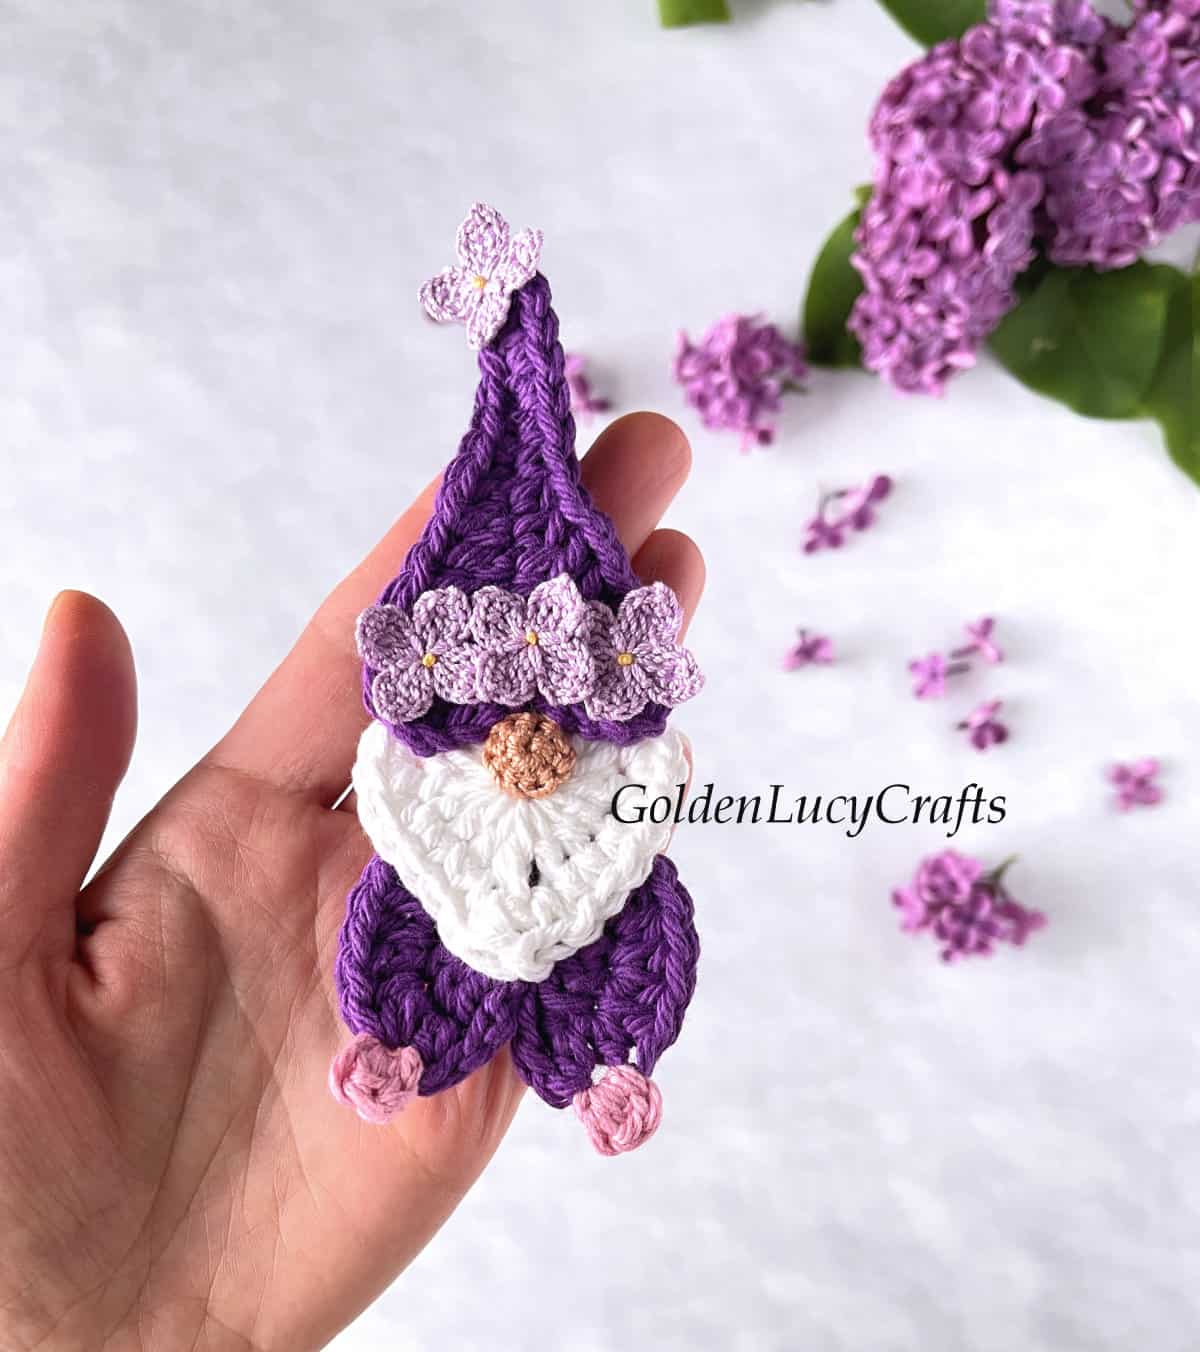 Crochet lilac gnome in the palm of a hand.